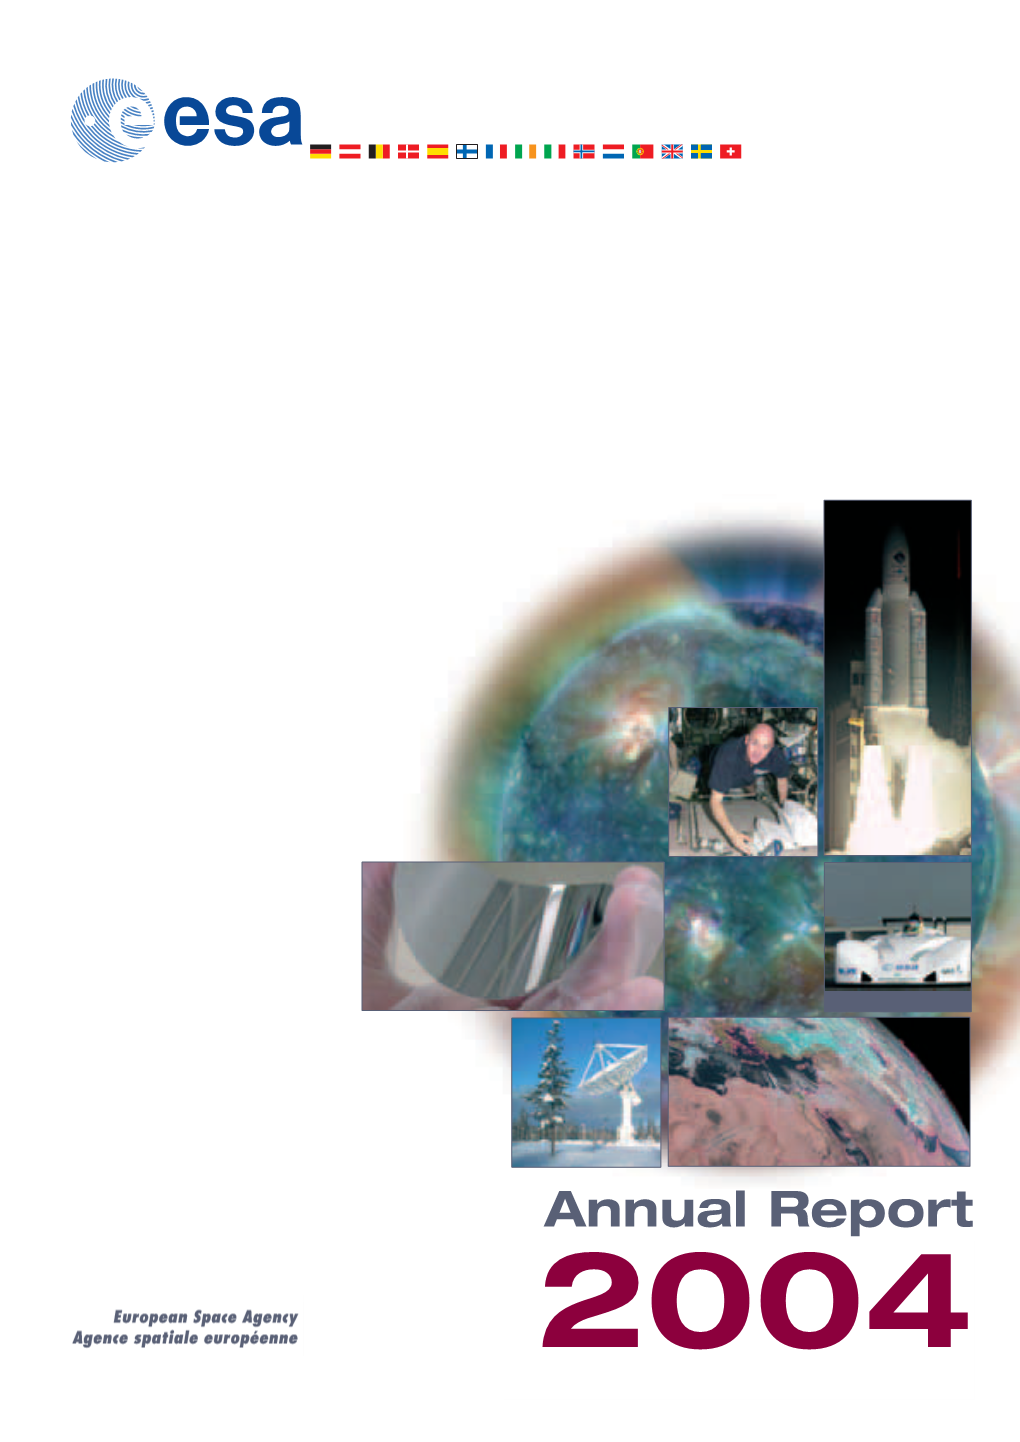 Annual Report 2004 Foreword 5 the Year in Review 7 the Activities